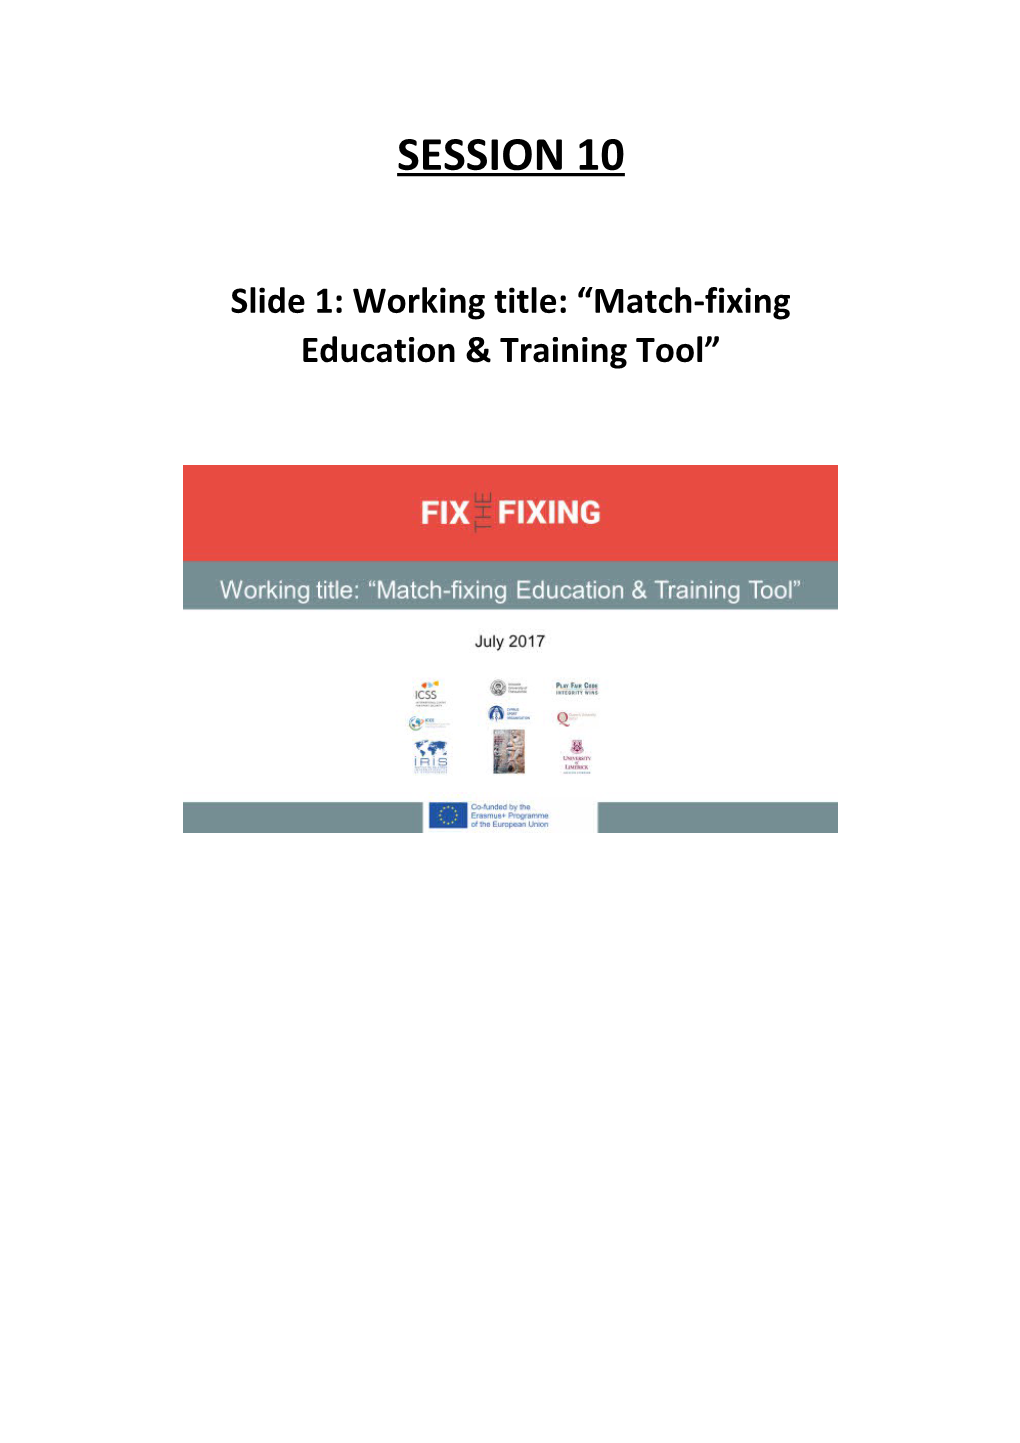 Slide 1: Working Title: Match-Fixing Education & Training Tool